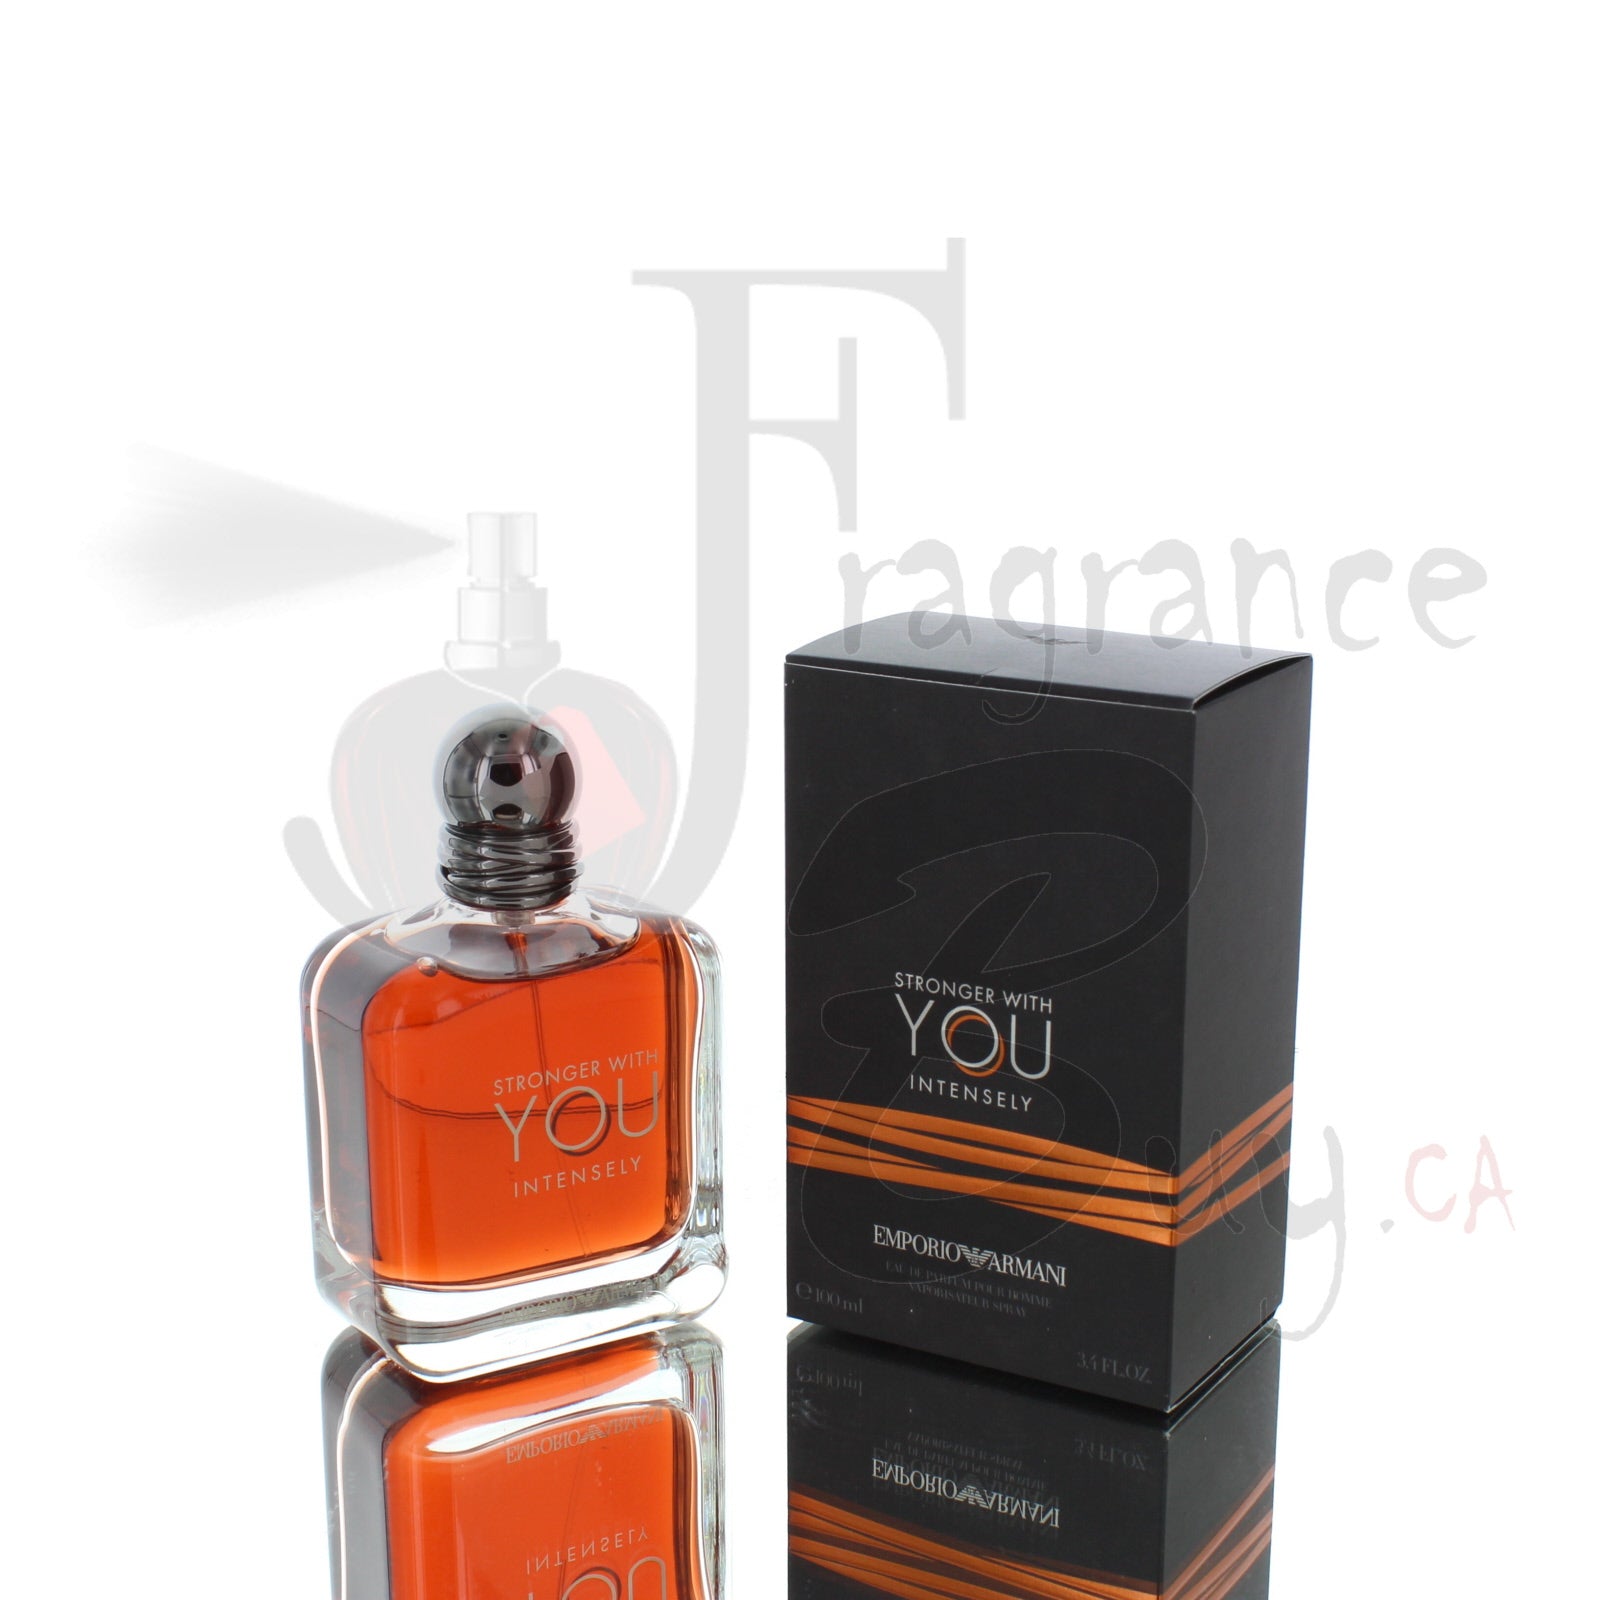 giorgio armani stronger with you intensely